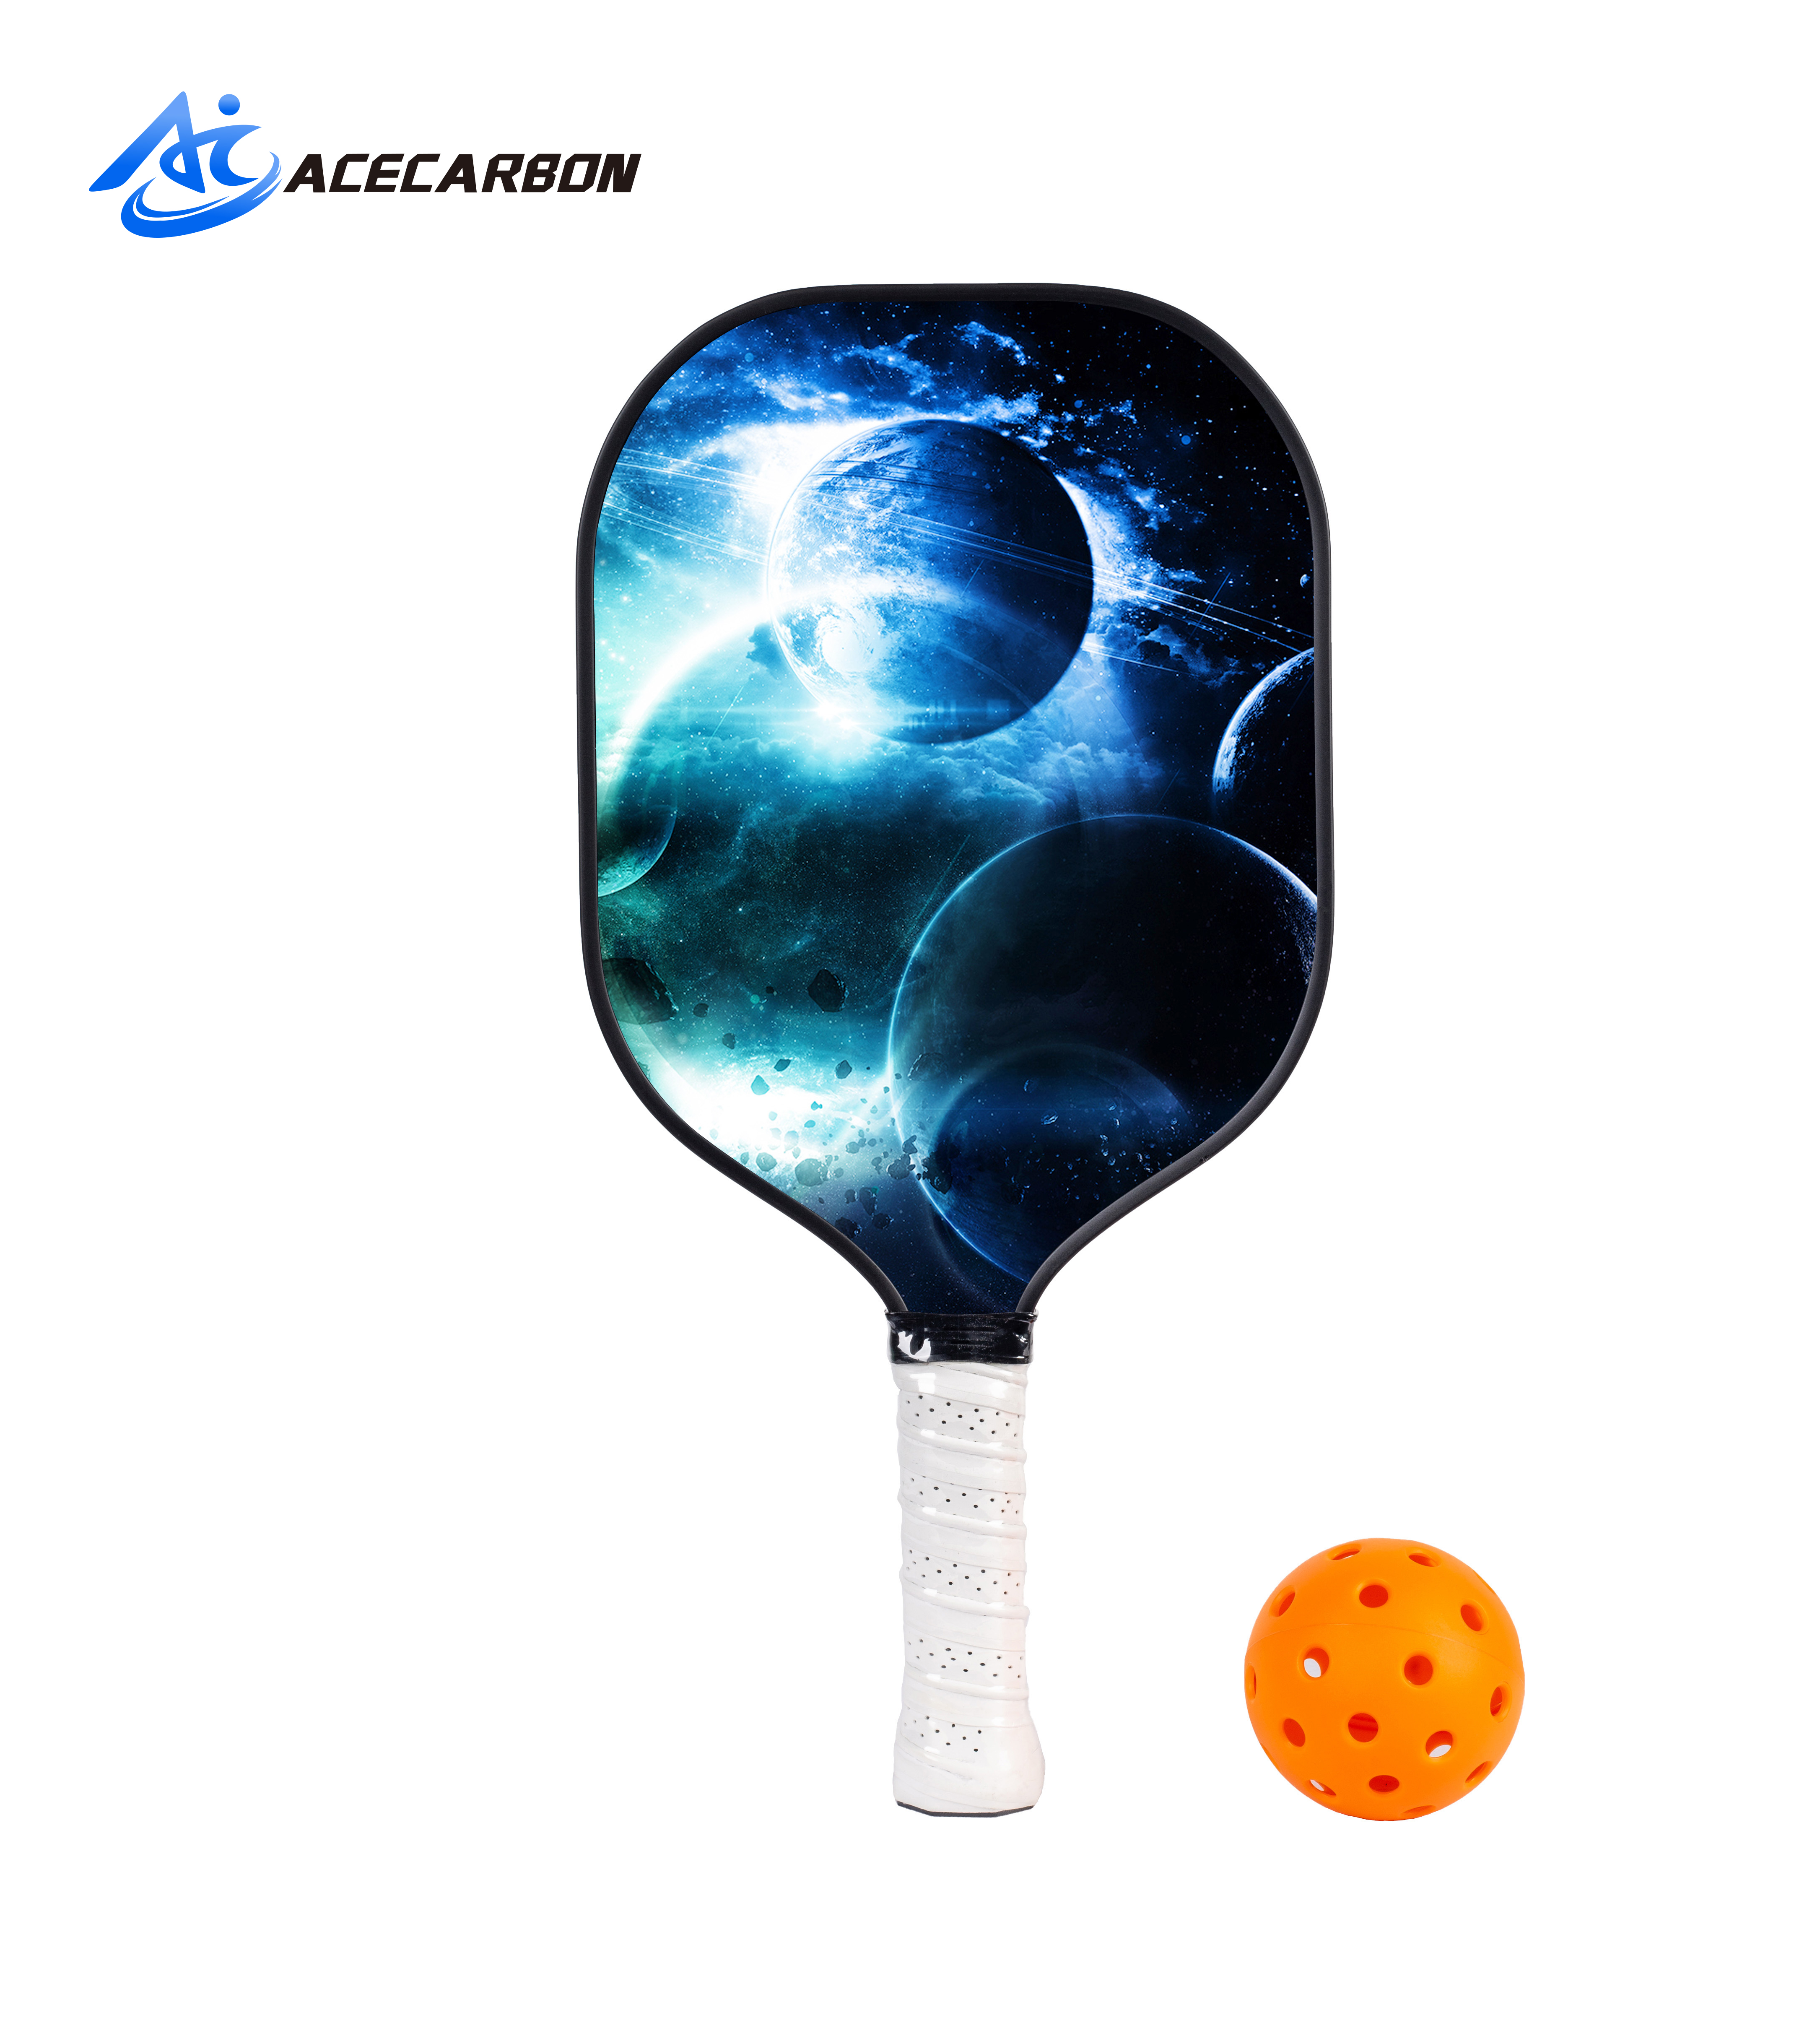 ACECARBON's Pickleball Precision: Navigating the Court with Confidence